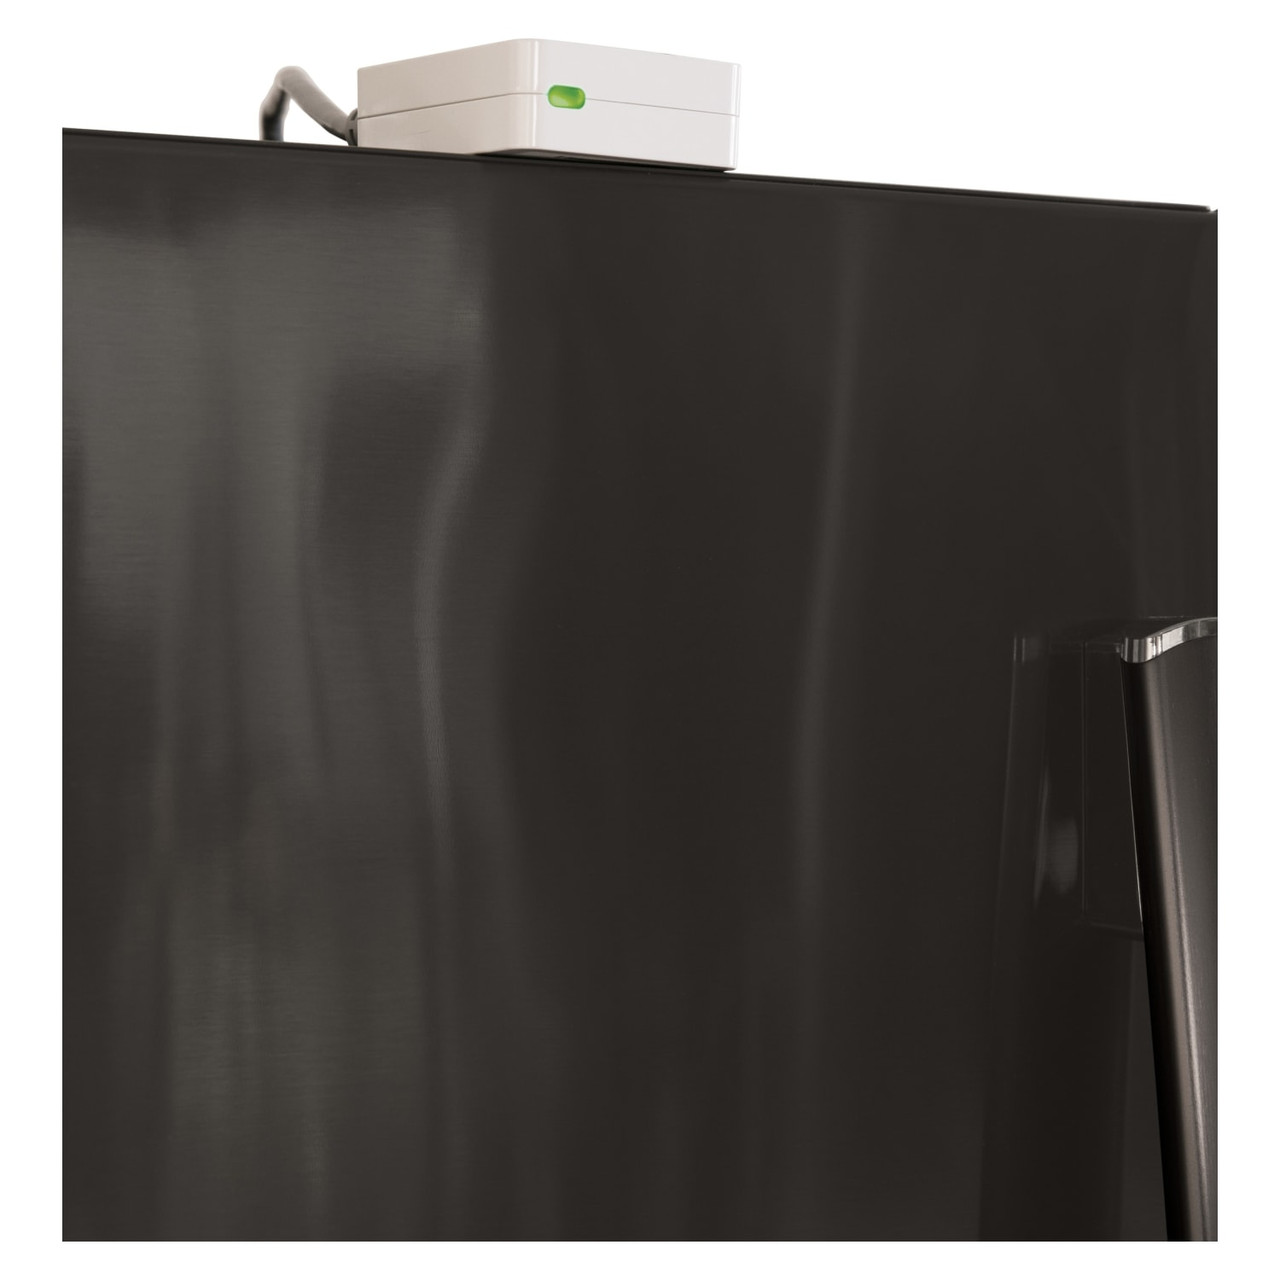 GE Profile Series 27.7 Cu. Ft. French-Door Refrigerator with Hands-Free AutoFill - PFE28KBLTS